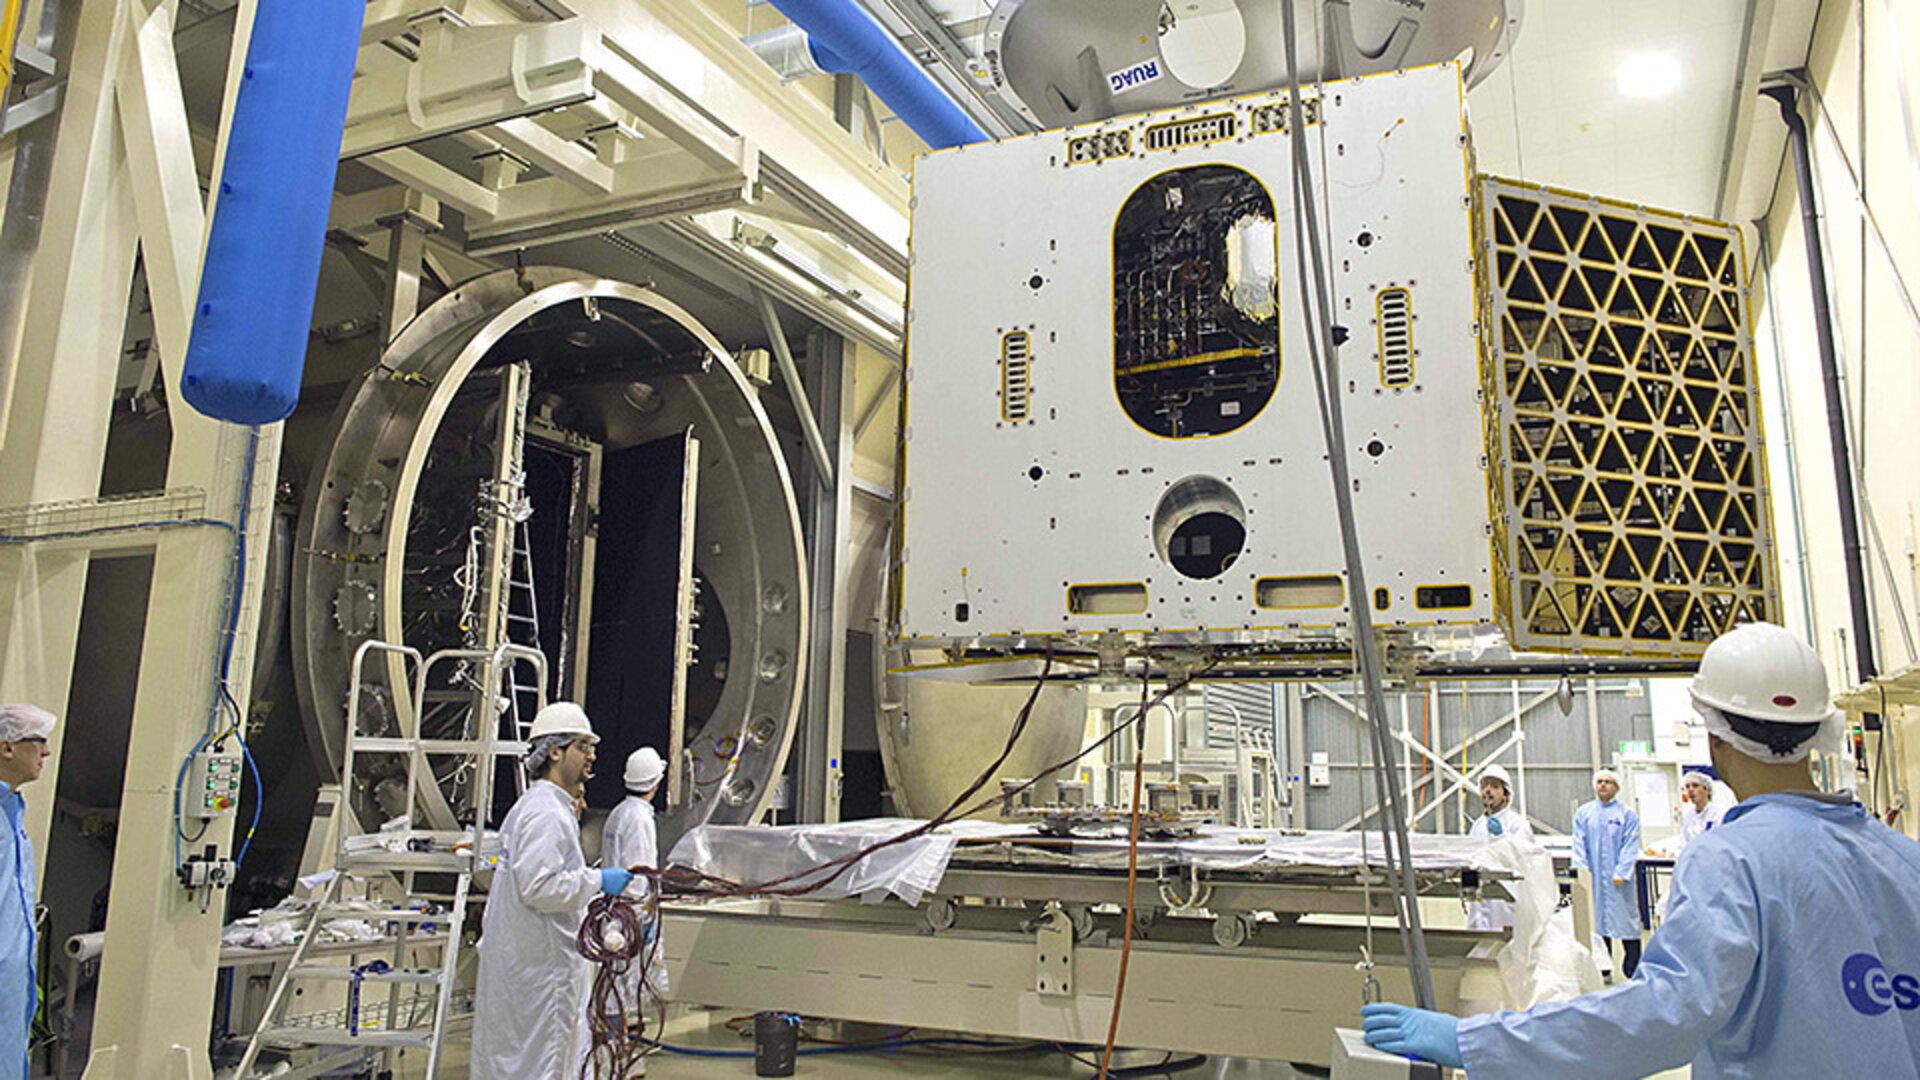 Mercury Planetary Orbiter being placed in Phenix thermal vacuum facility